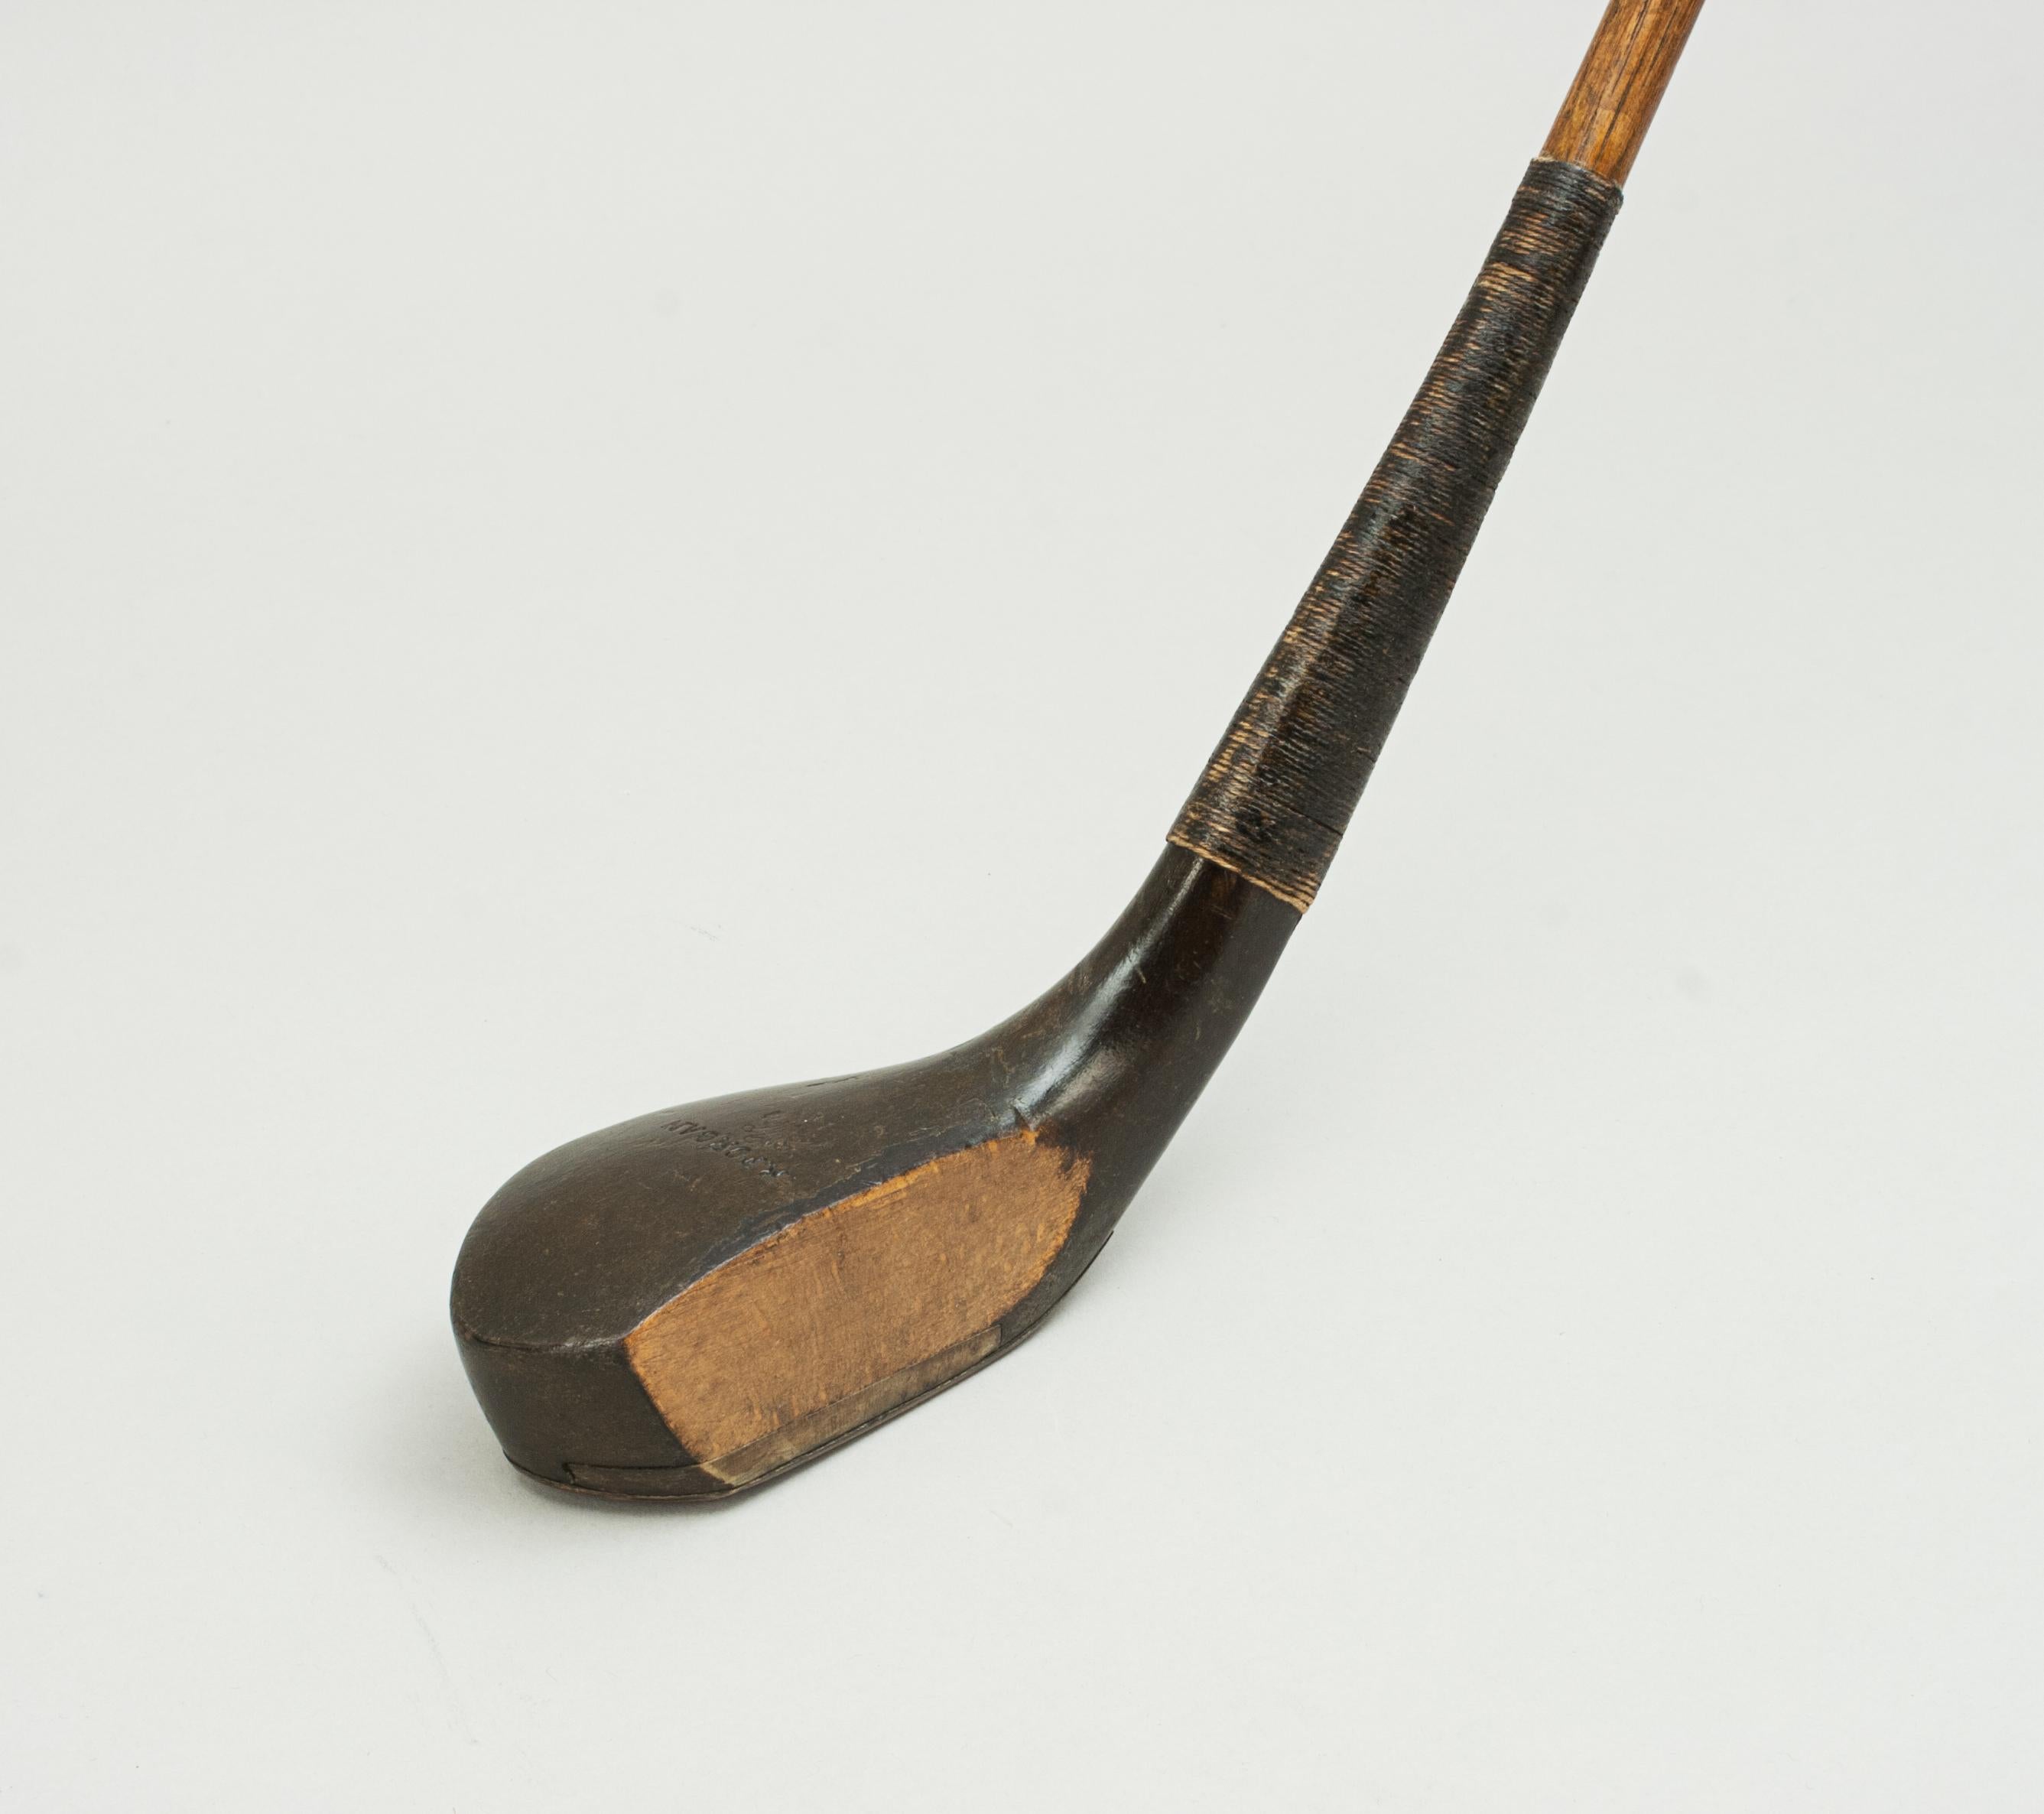 Antique long nose, deep faced golf club, Robert Forgan, St Andrews.
A very good beechwood long nose deep face golf club, long spoon by Robert Forgan of St Andrews. This great looking club has lead weight to the rear and the traditional horn slip